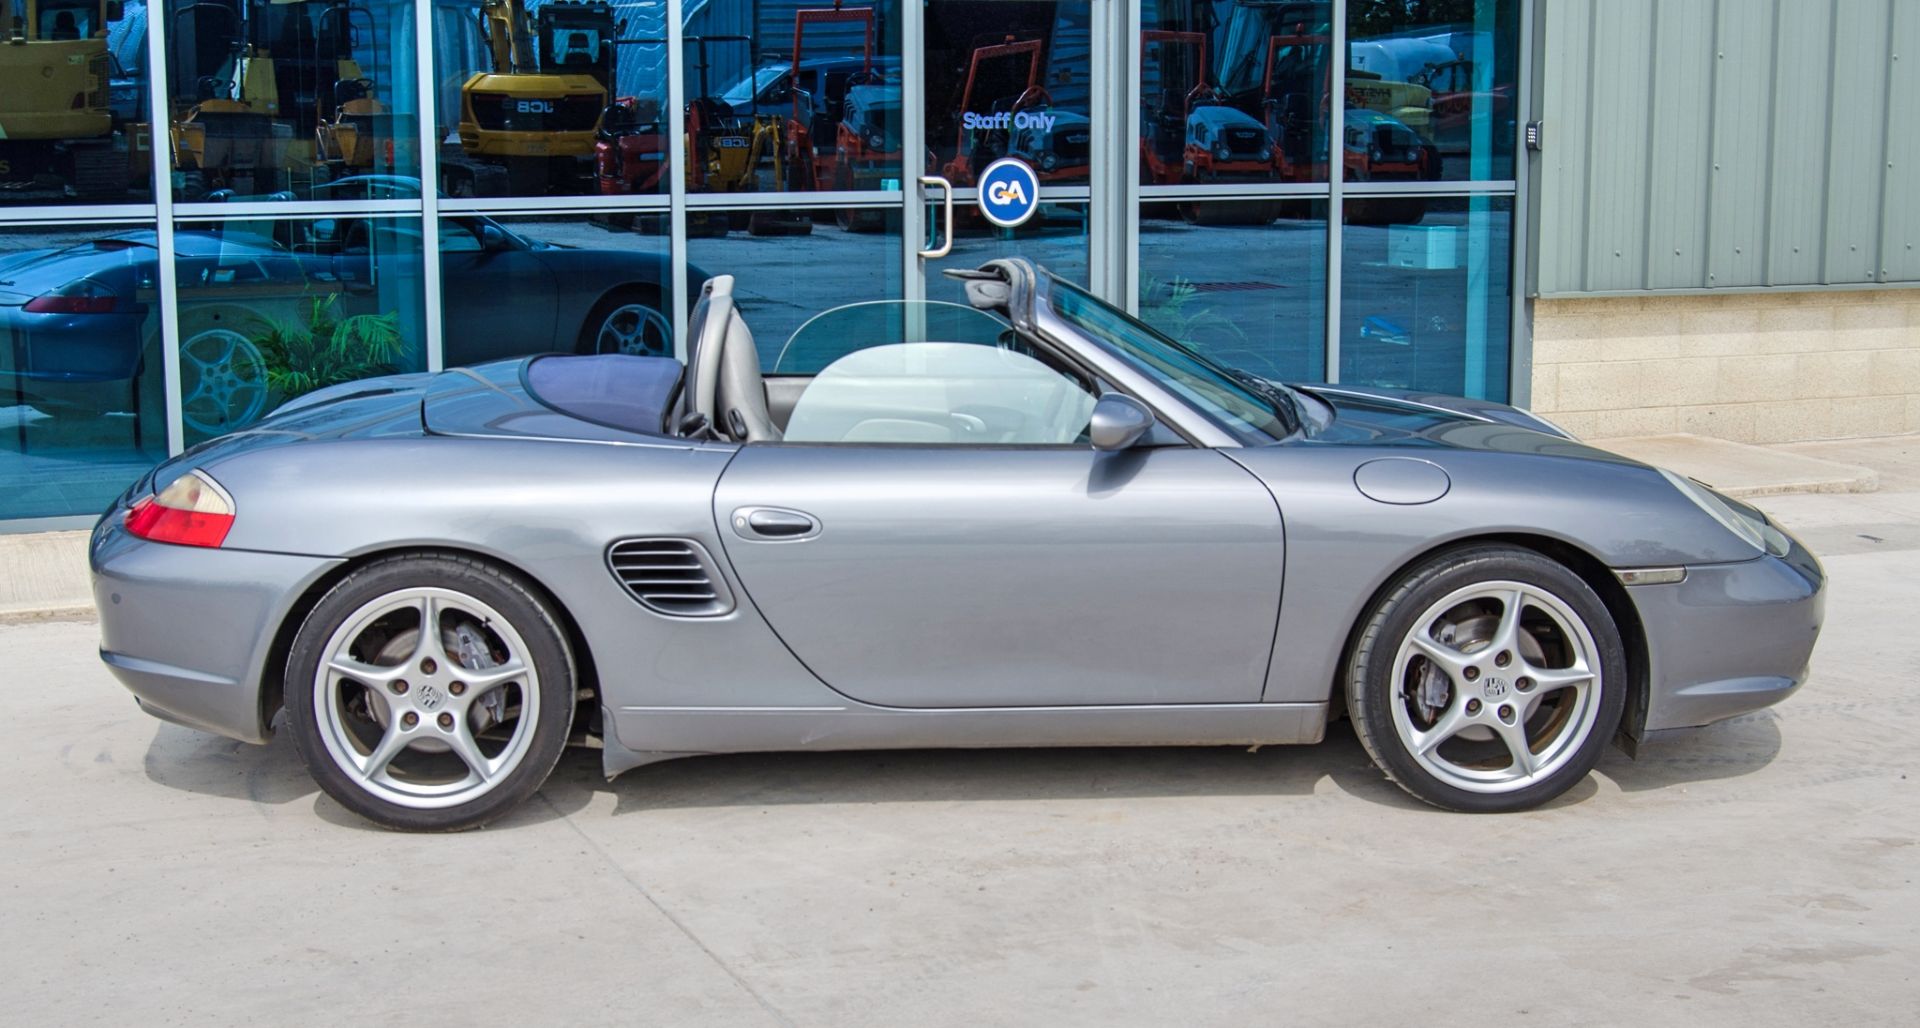 2003 Porsche Boxster 2.7 5 speed manual convertible roadster - Image 14 of 50